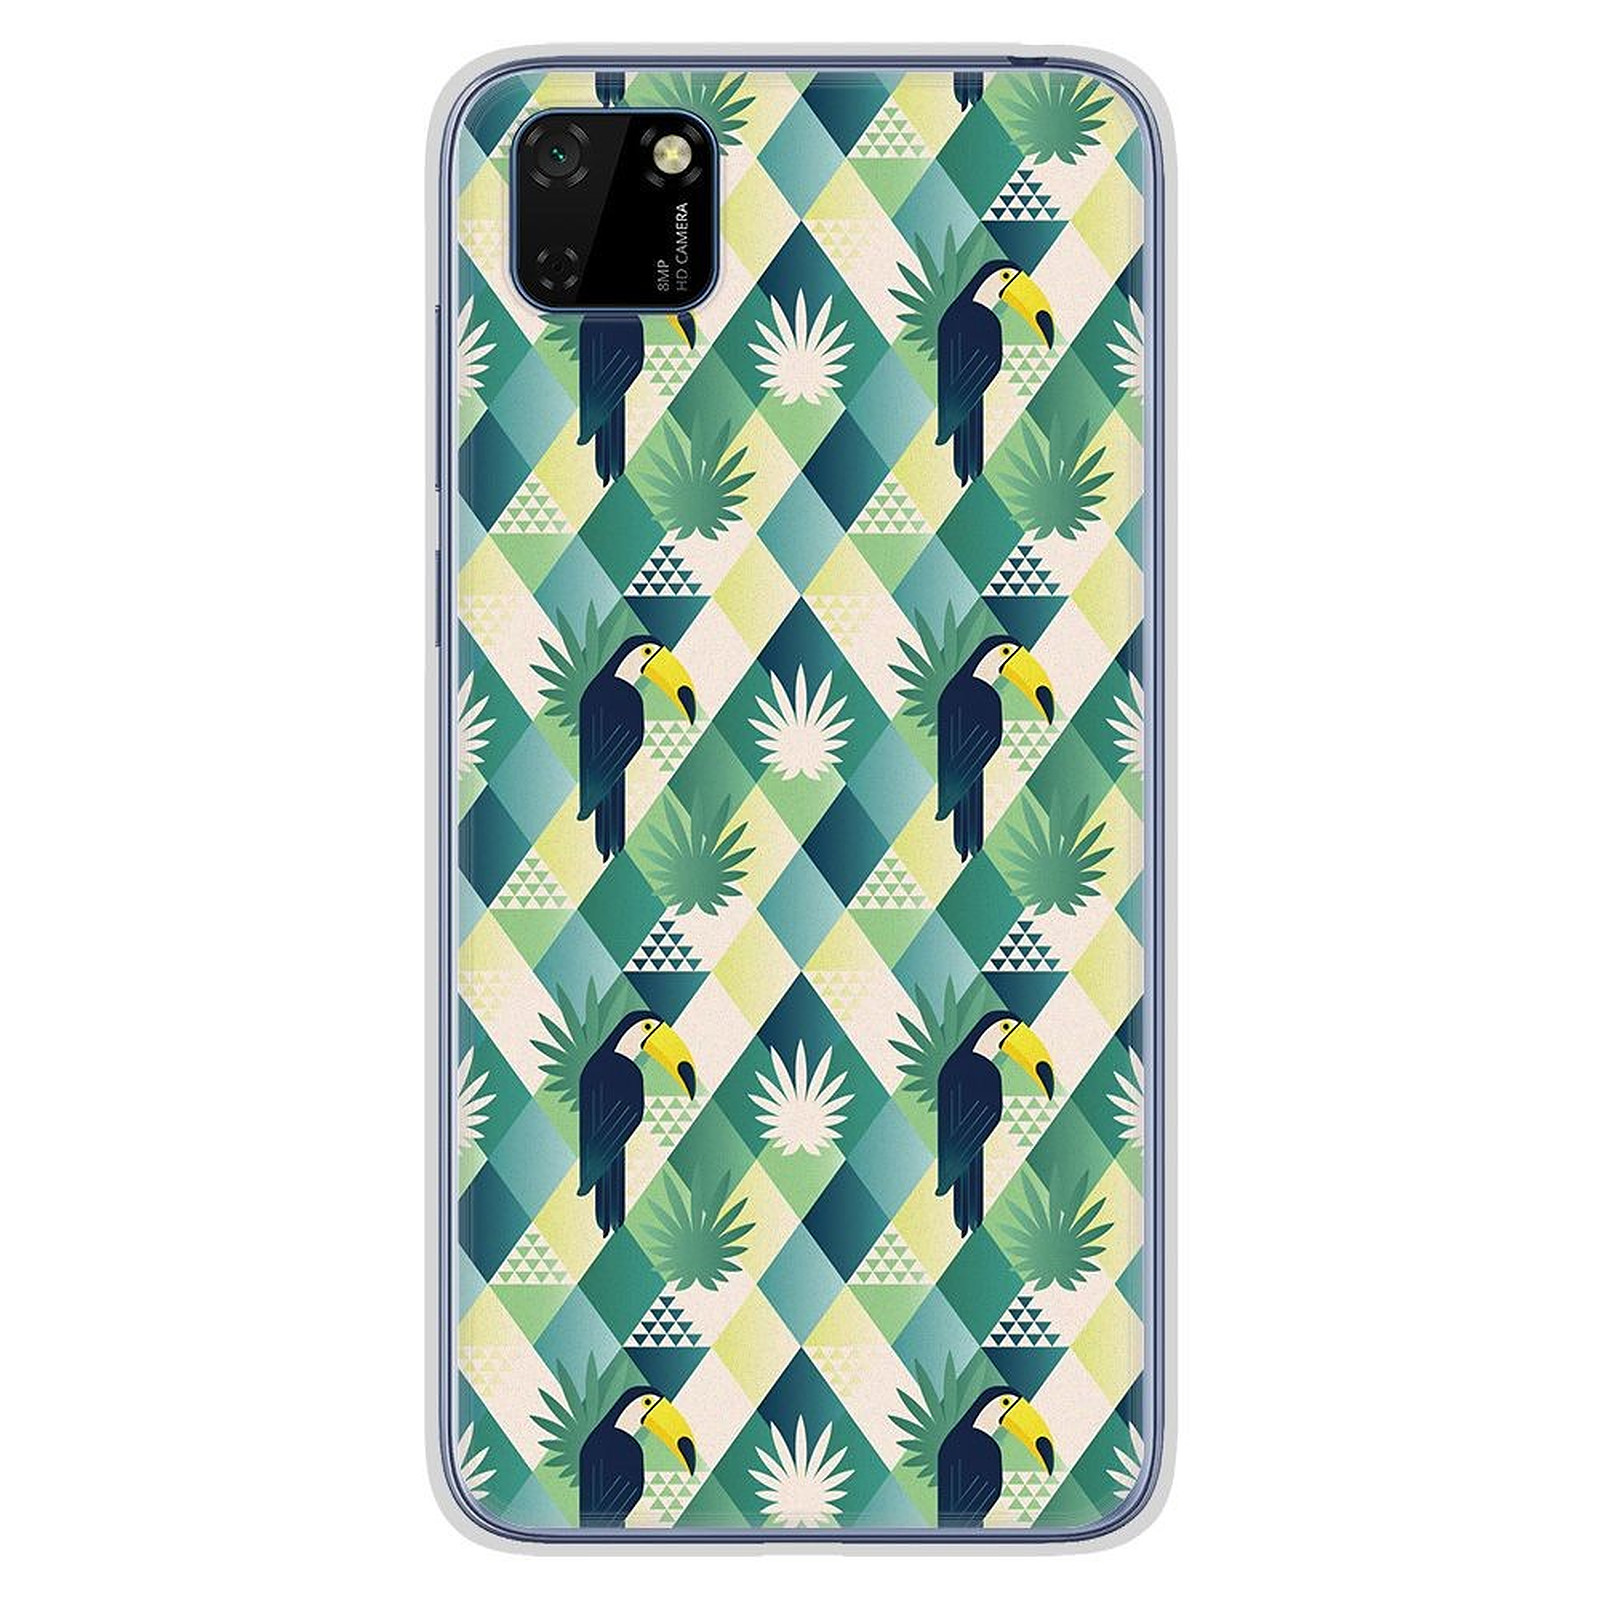 1001 Coques Coque silicone gel Huawei Y5P motif Toucan losange - Coque telephone 1001Coques